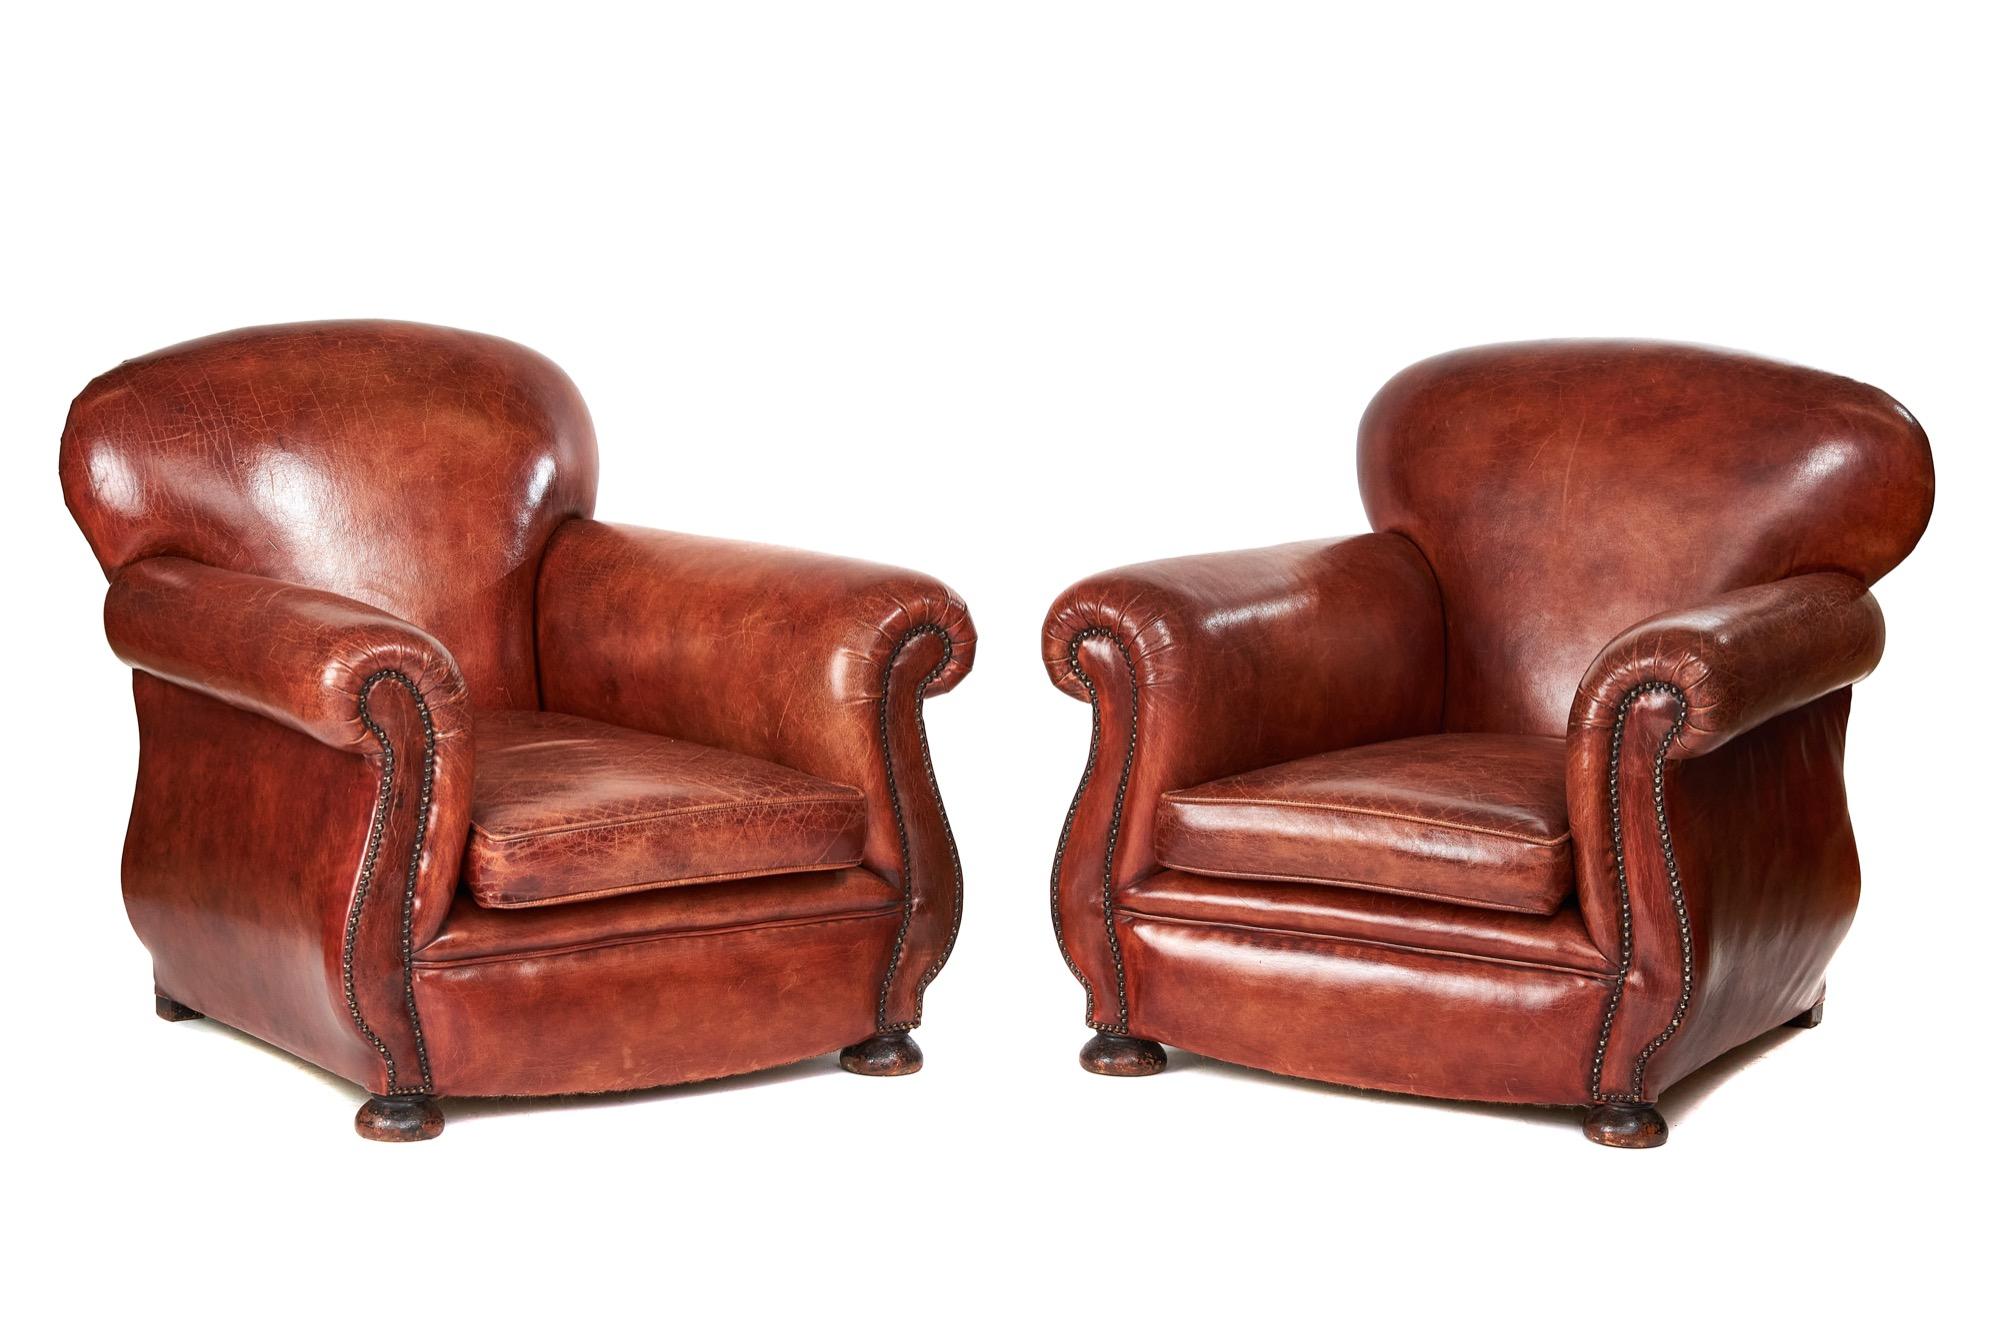 Pair leather club chairs, circa 1920s.
Recently upholstered in leather and coloured to chestnut
I have expert French Polishers, to colour and shade the leather,
good worn leather finish, 
brass studded decoration on front & back
loose